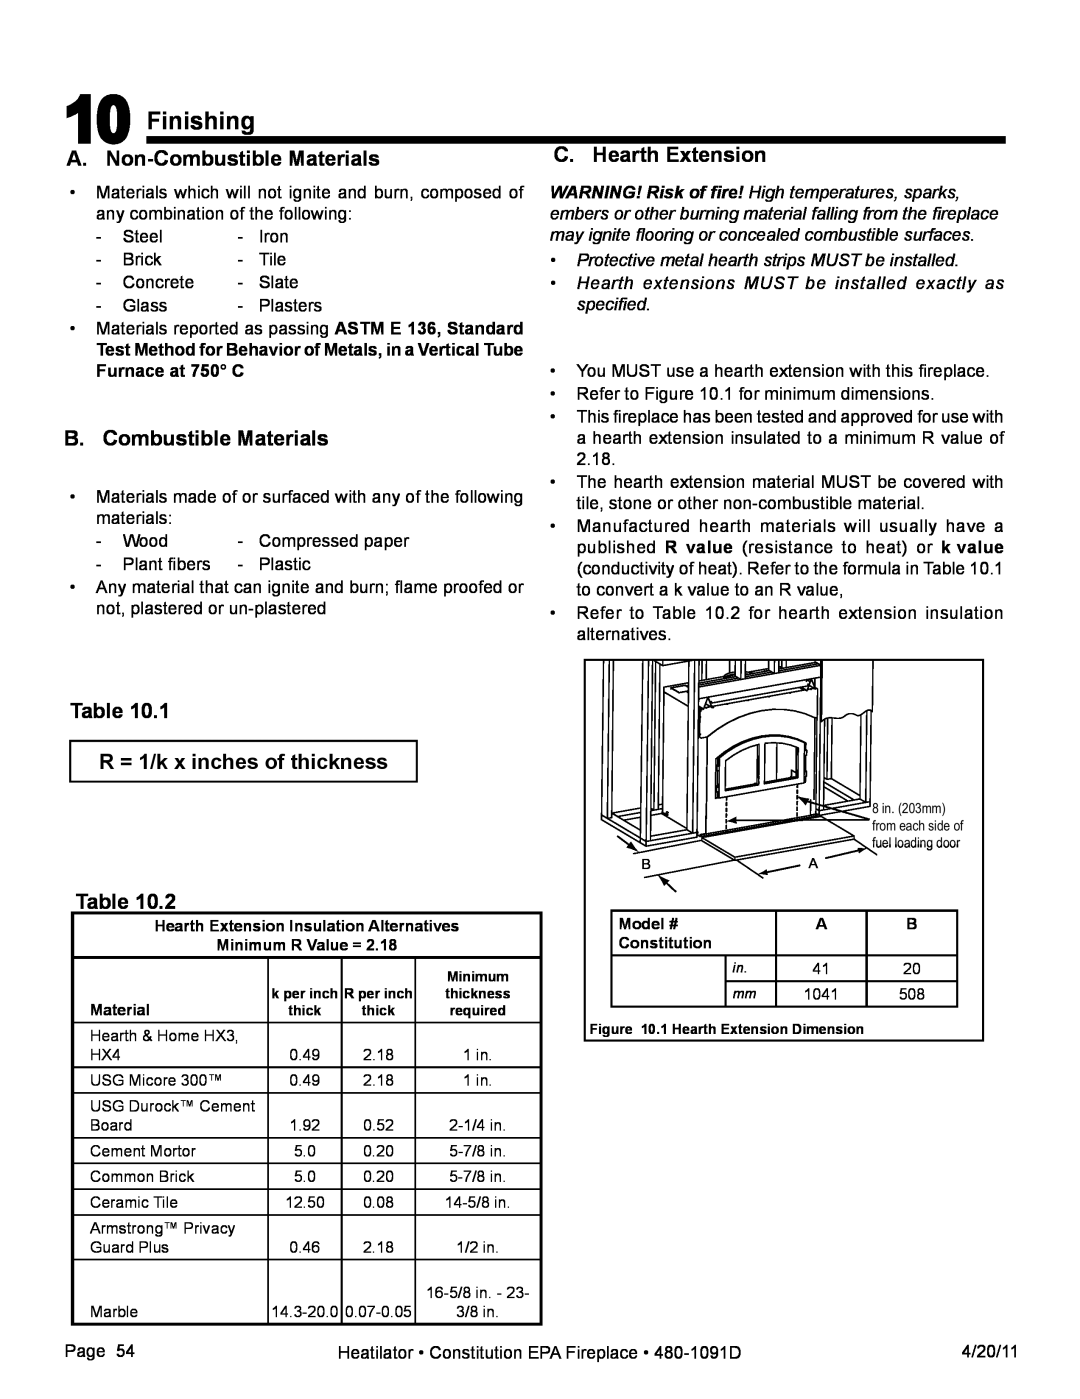 Heatiator C40 owner manual Finishing, C. Hearth Extension, A. Non-CombustibleMaterials, B. Combustible Materials 